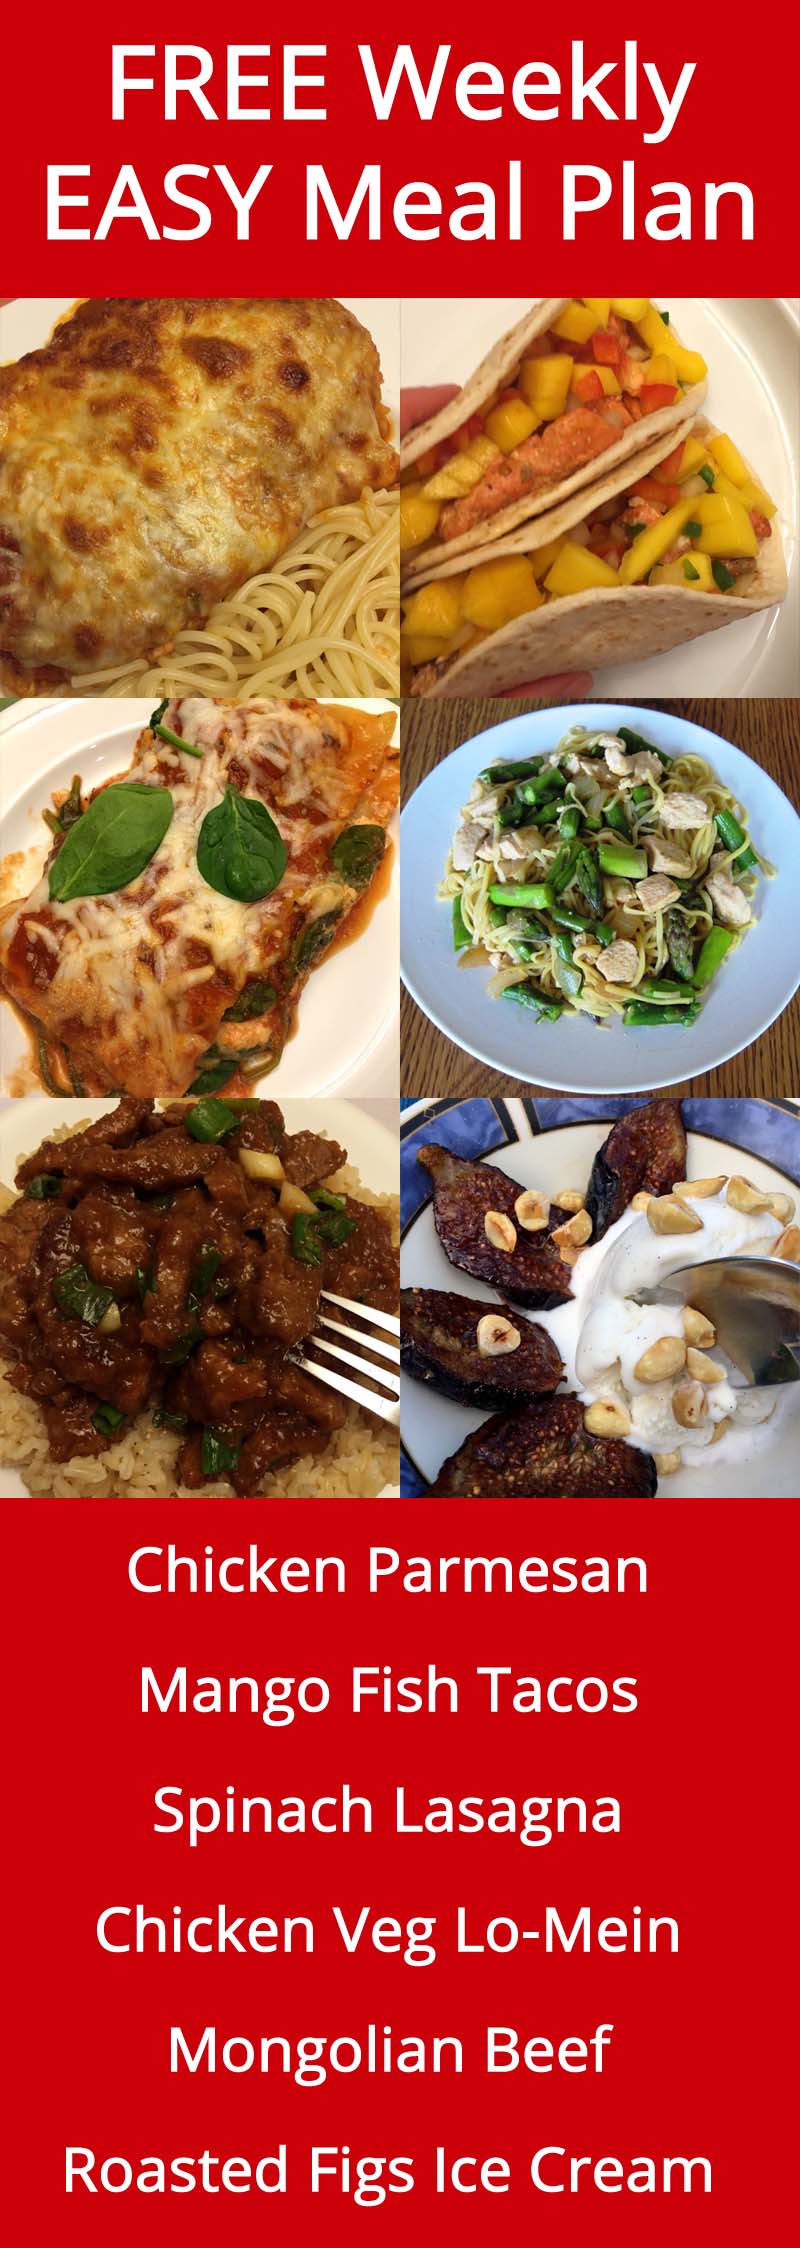 FREE Weekly Meal Plan - Week 29 Recipes And Easy Dinner Ideas